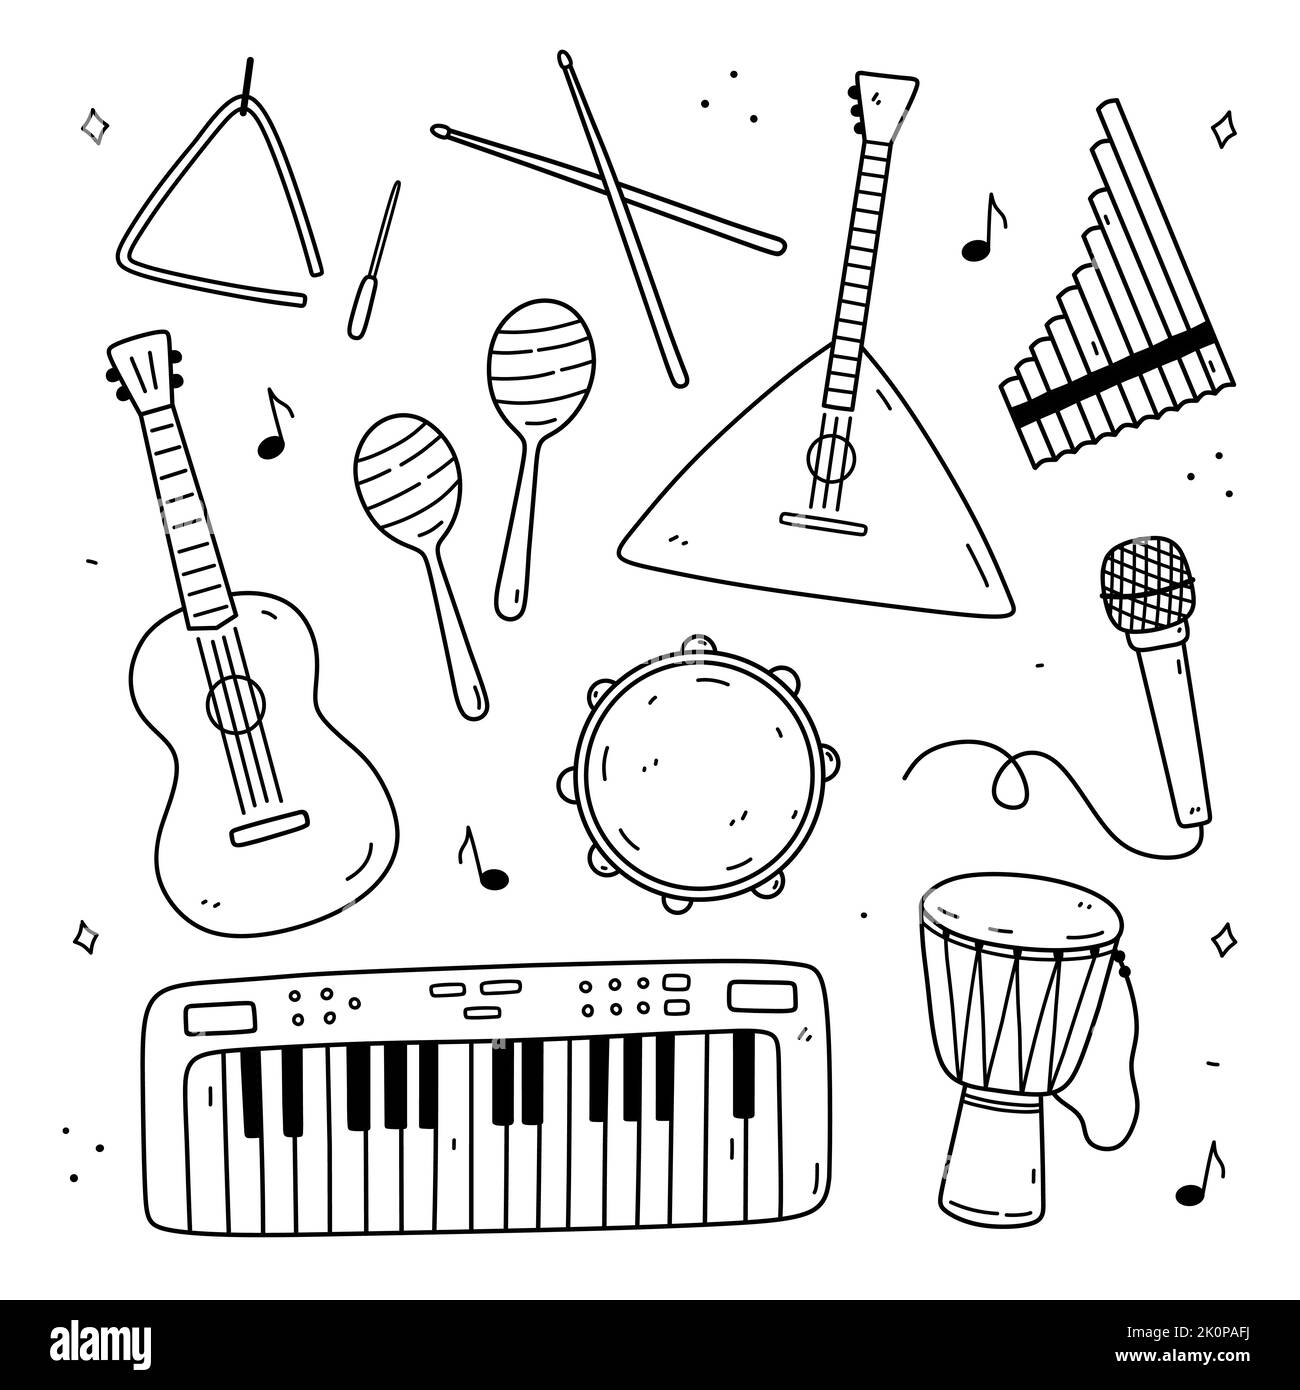 Triangle Instrument coloring page